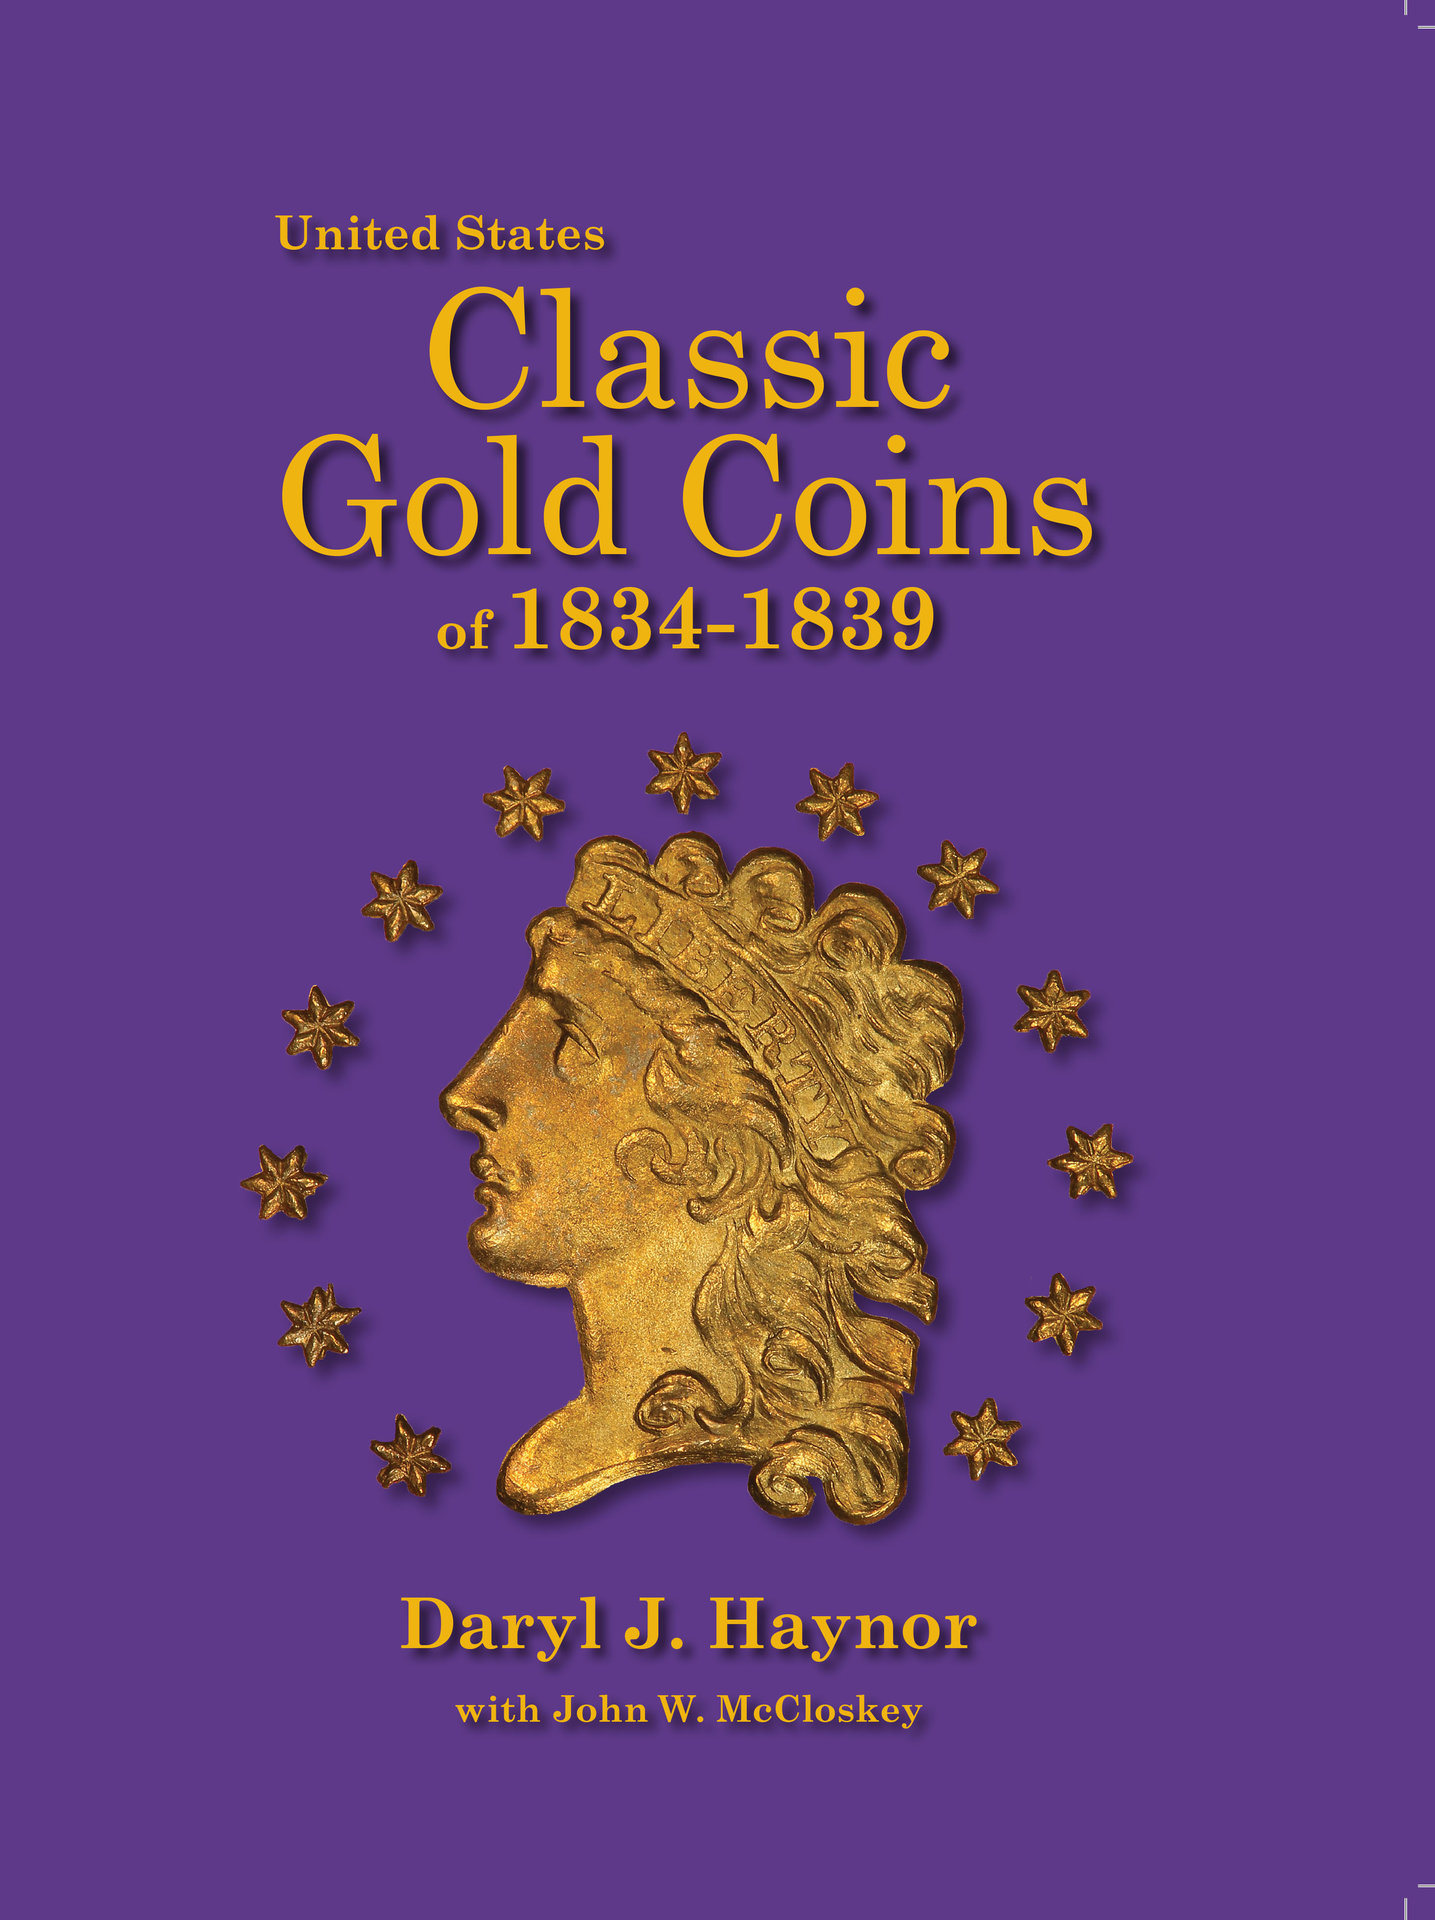 ClassicGoldCoins_CovTemplateV4-front-only-a.jpg